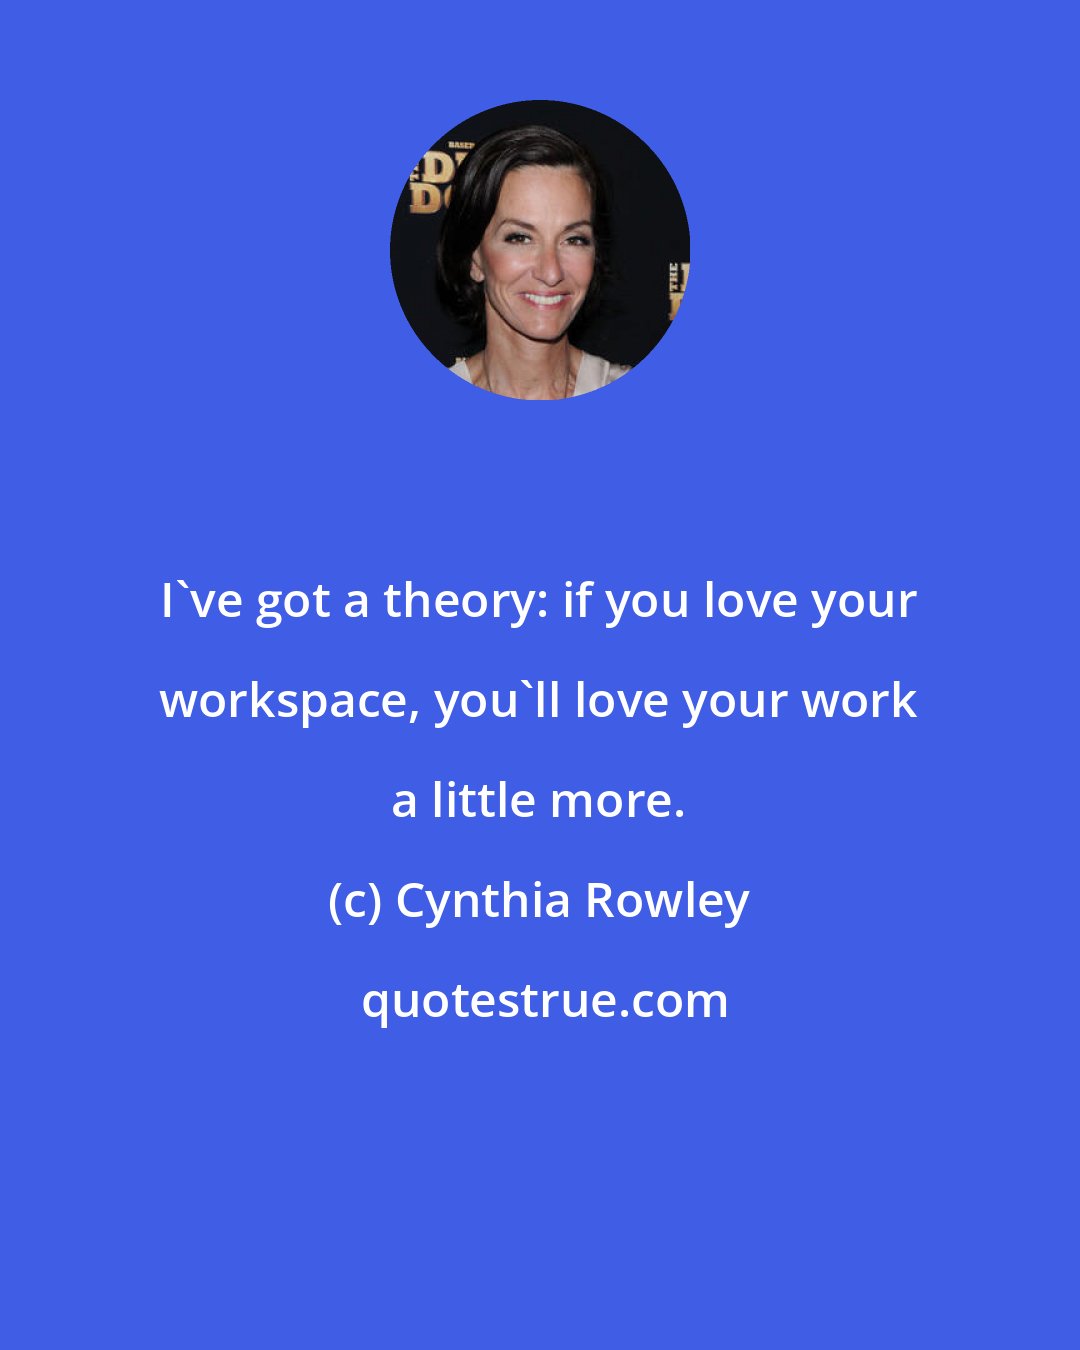 Cynthia Rowley: I've got a theory: if you love your workspace, you'll love your work a little more.